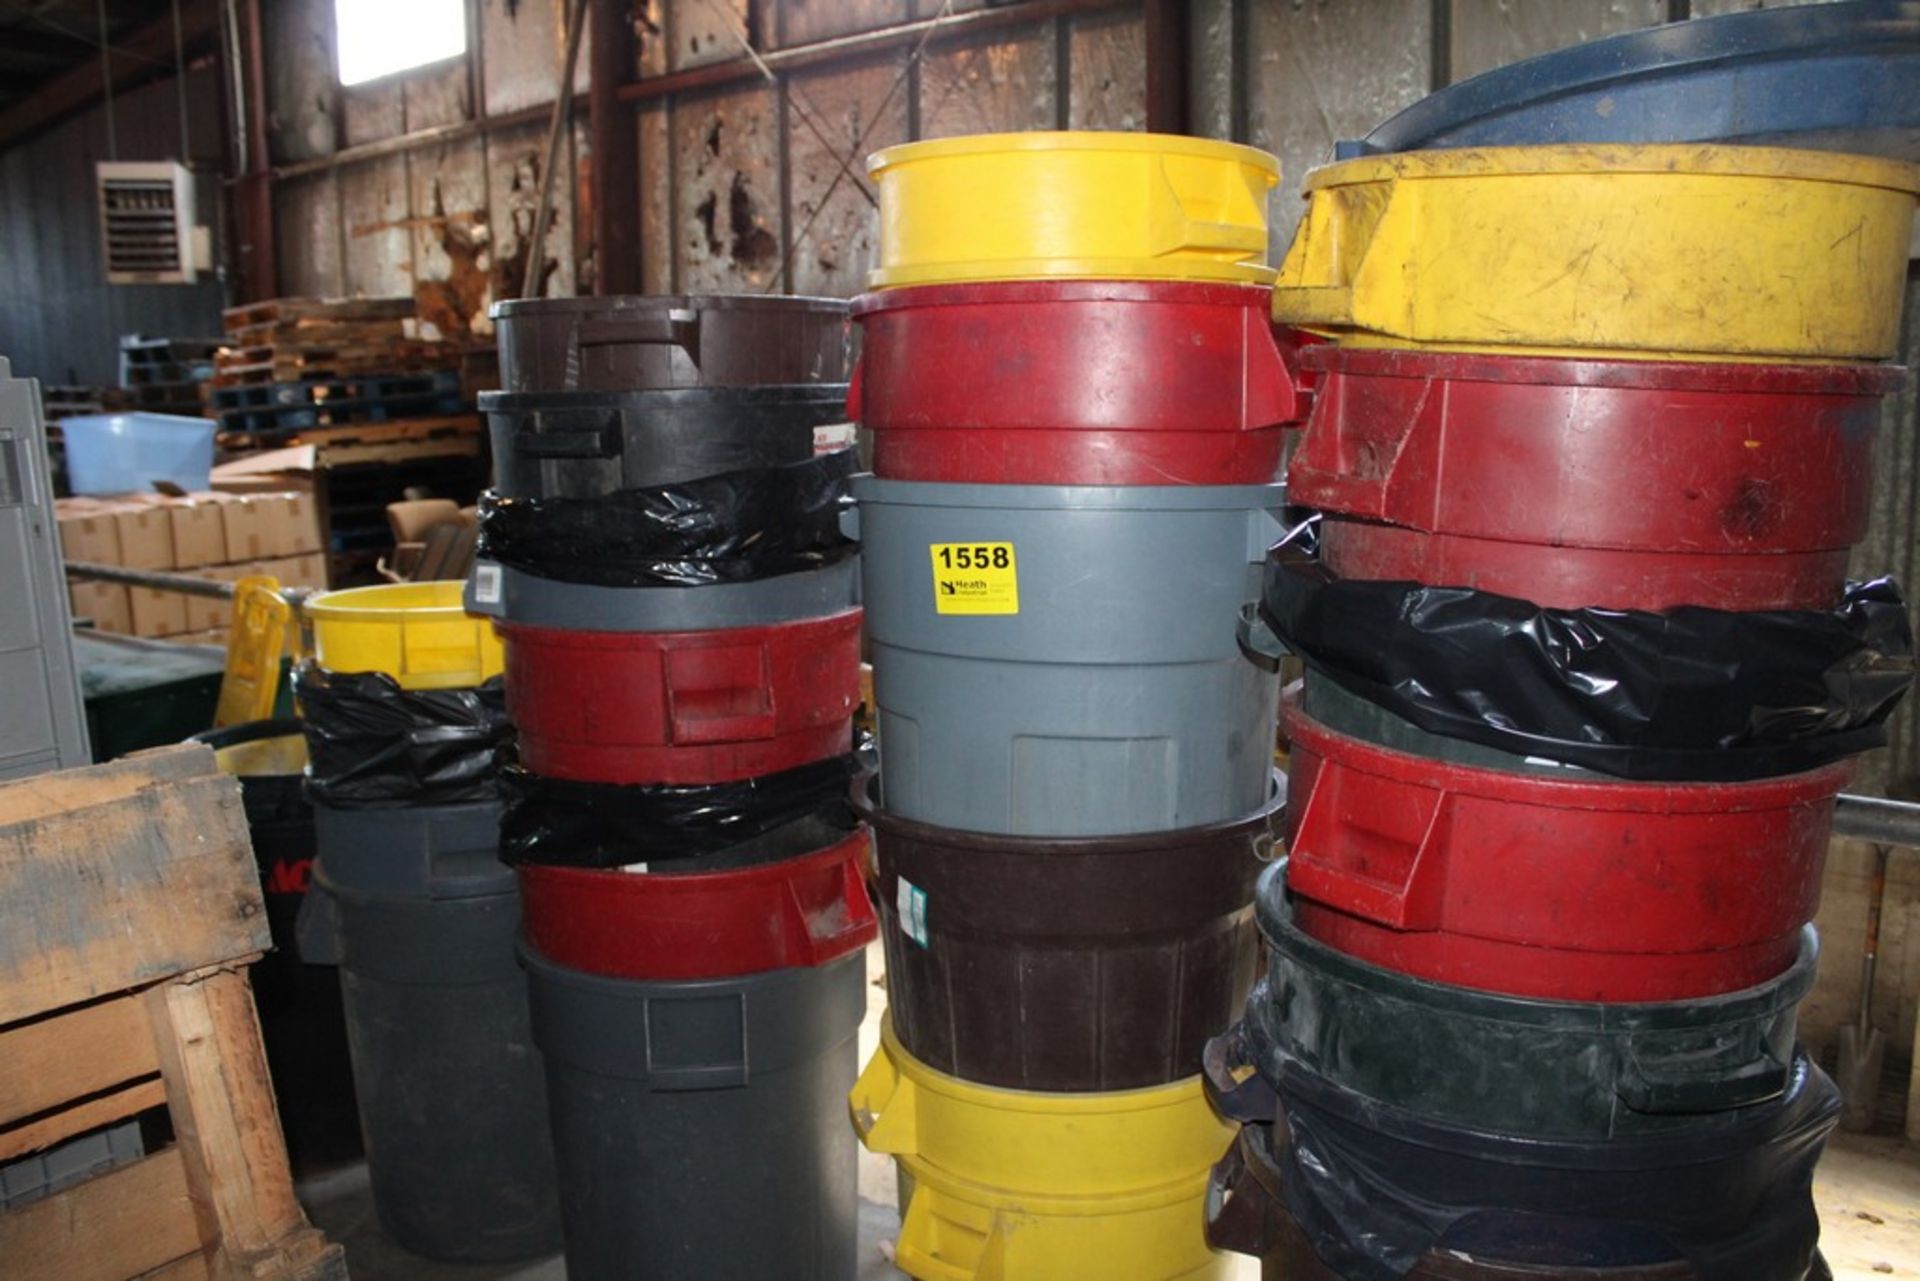 LARGE QTY OF TRASH CANS & CAUTION SIGNS